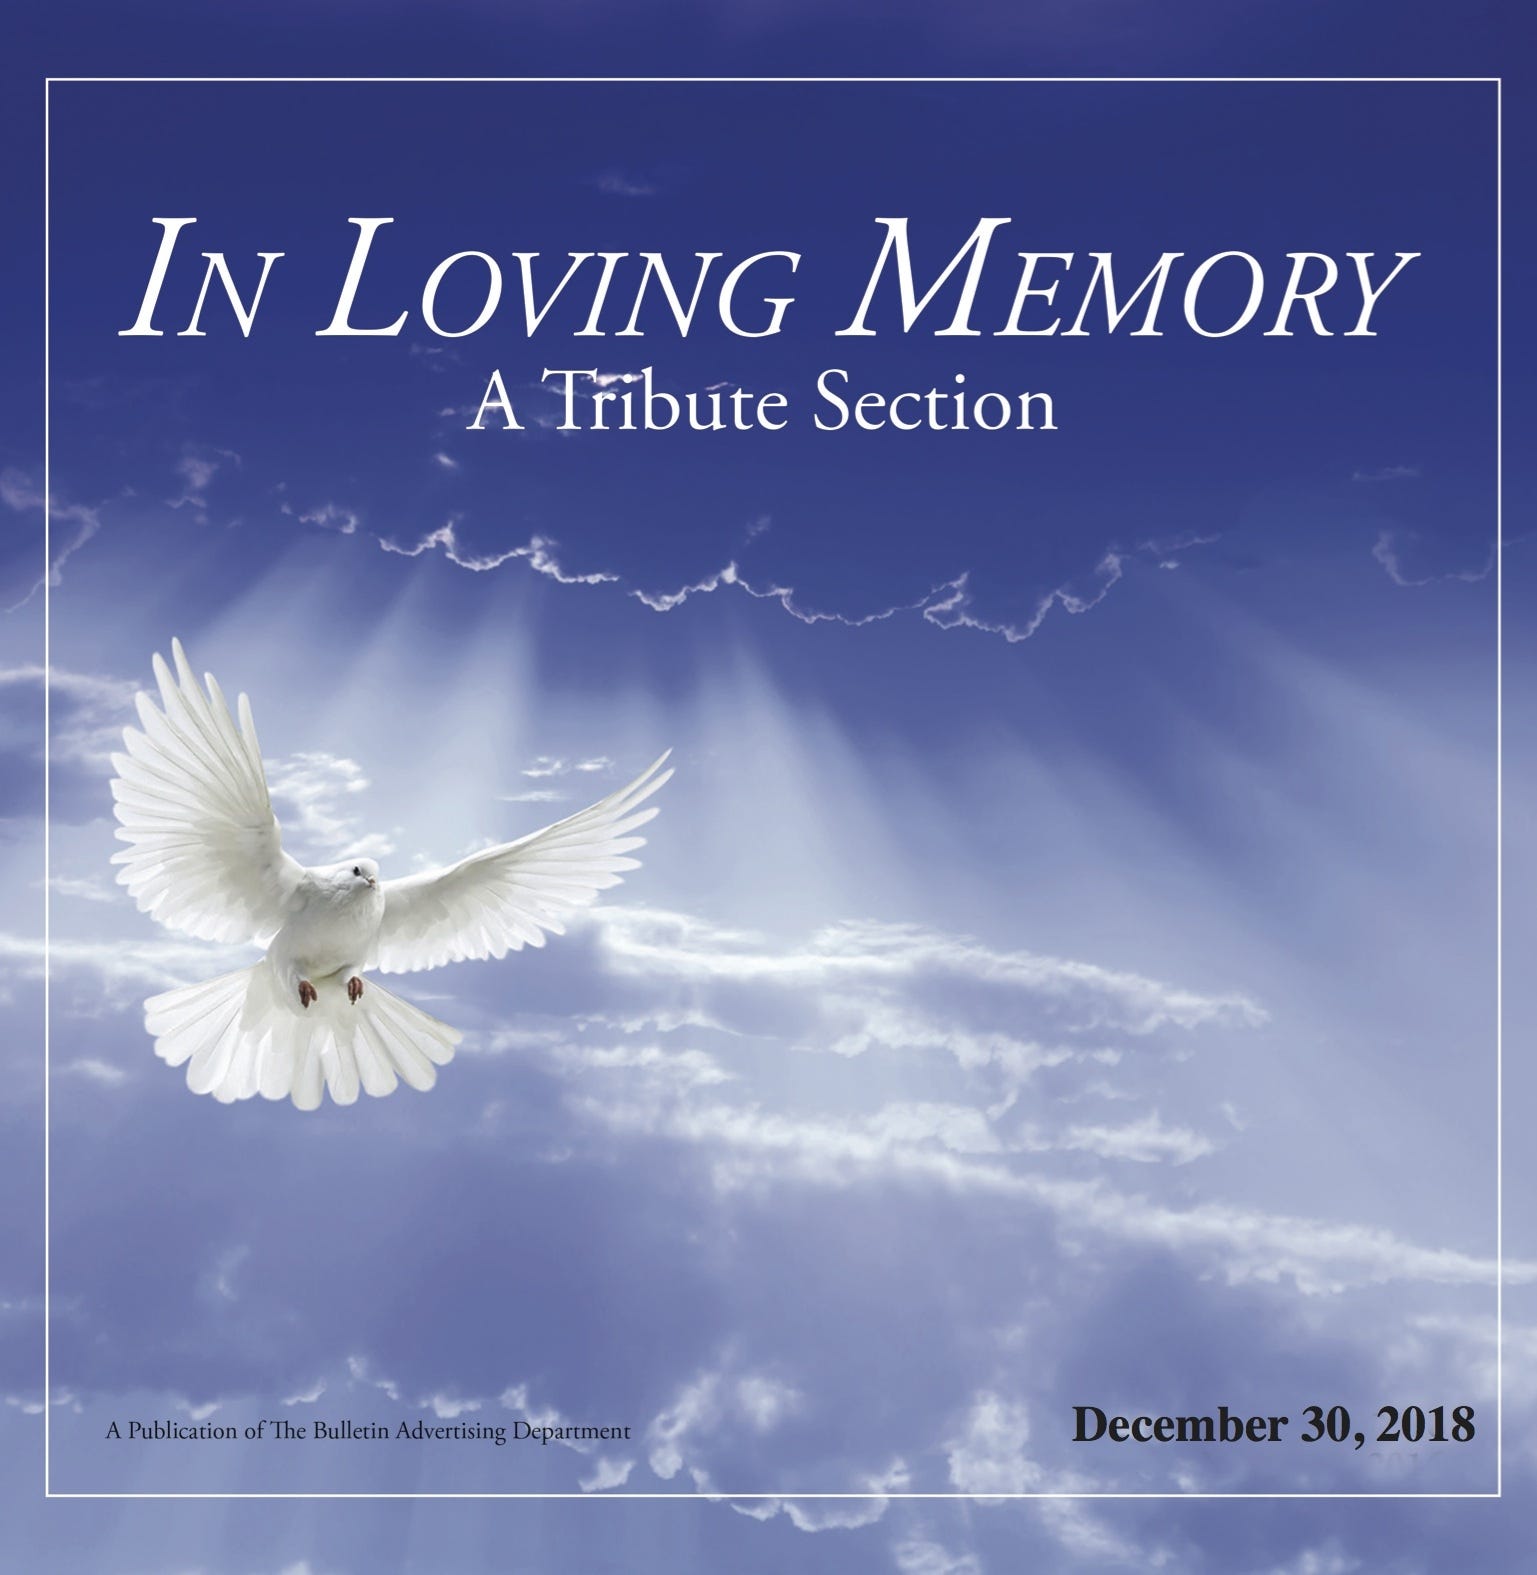 In Loving Memory 2018: A Tribute Section